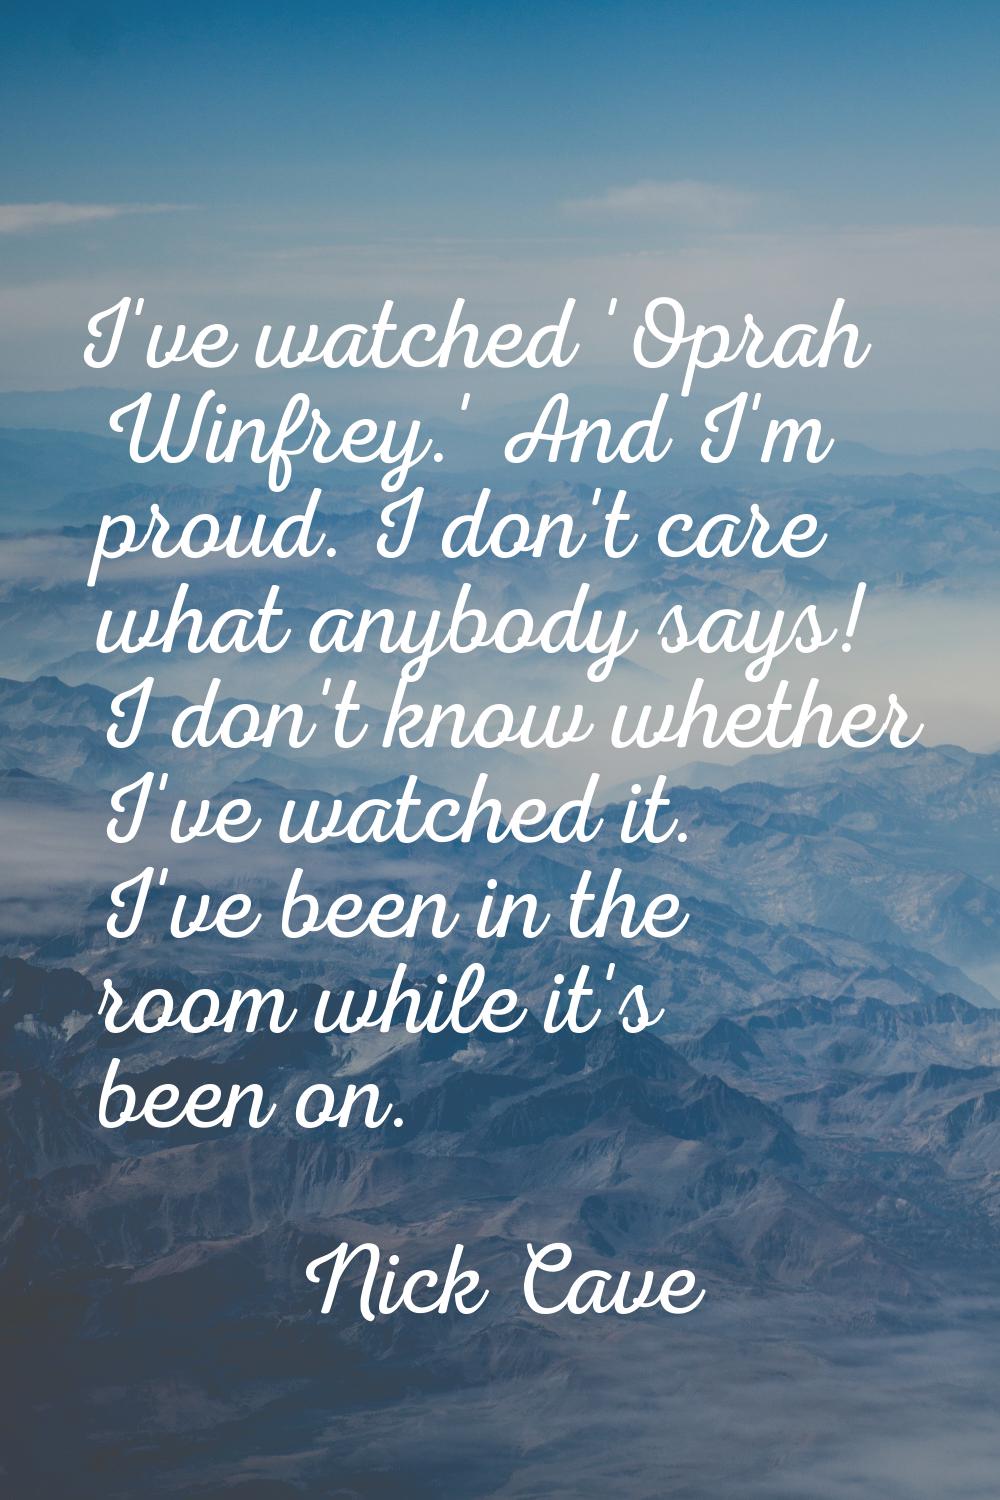 I've watched 'Oprah Winfrey.' And I'm proud. I don't care what anybody says! I don't know whether I